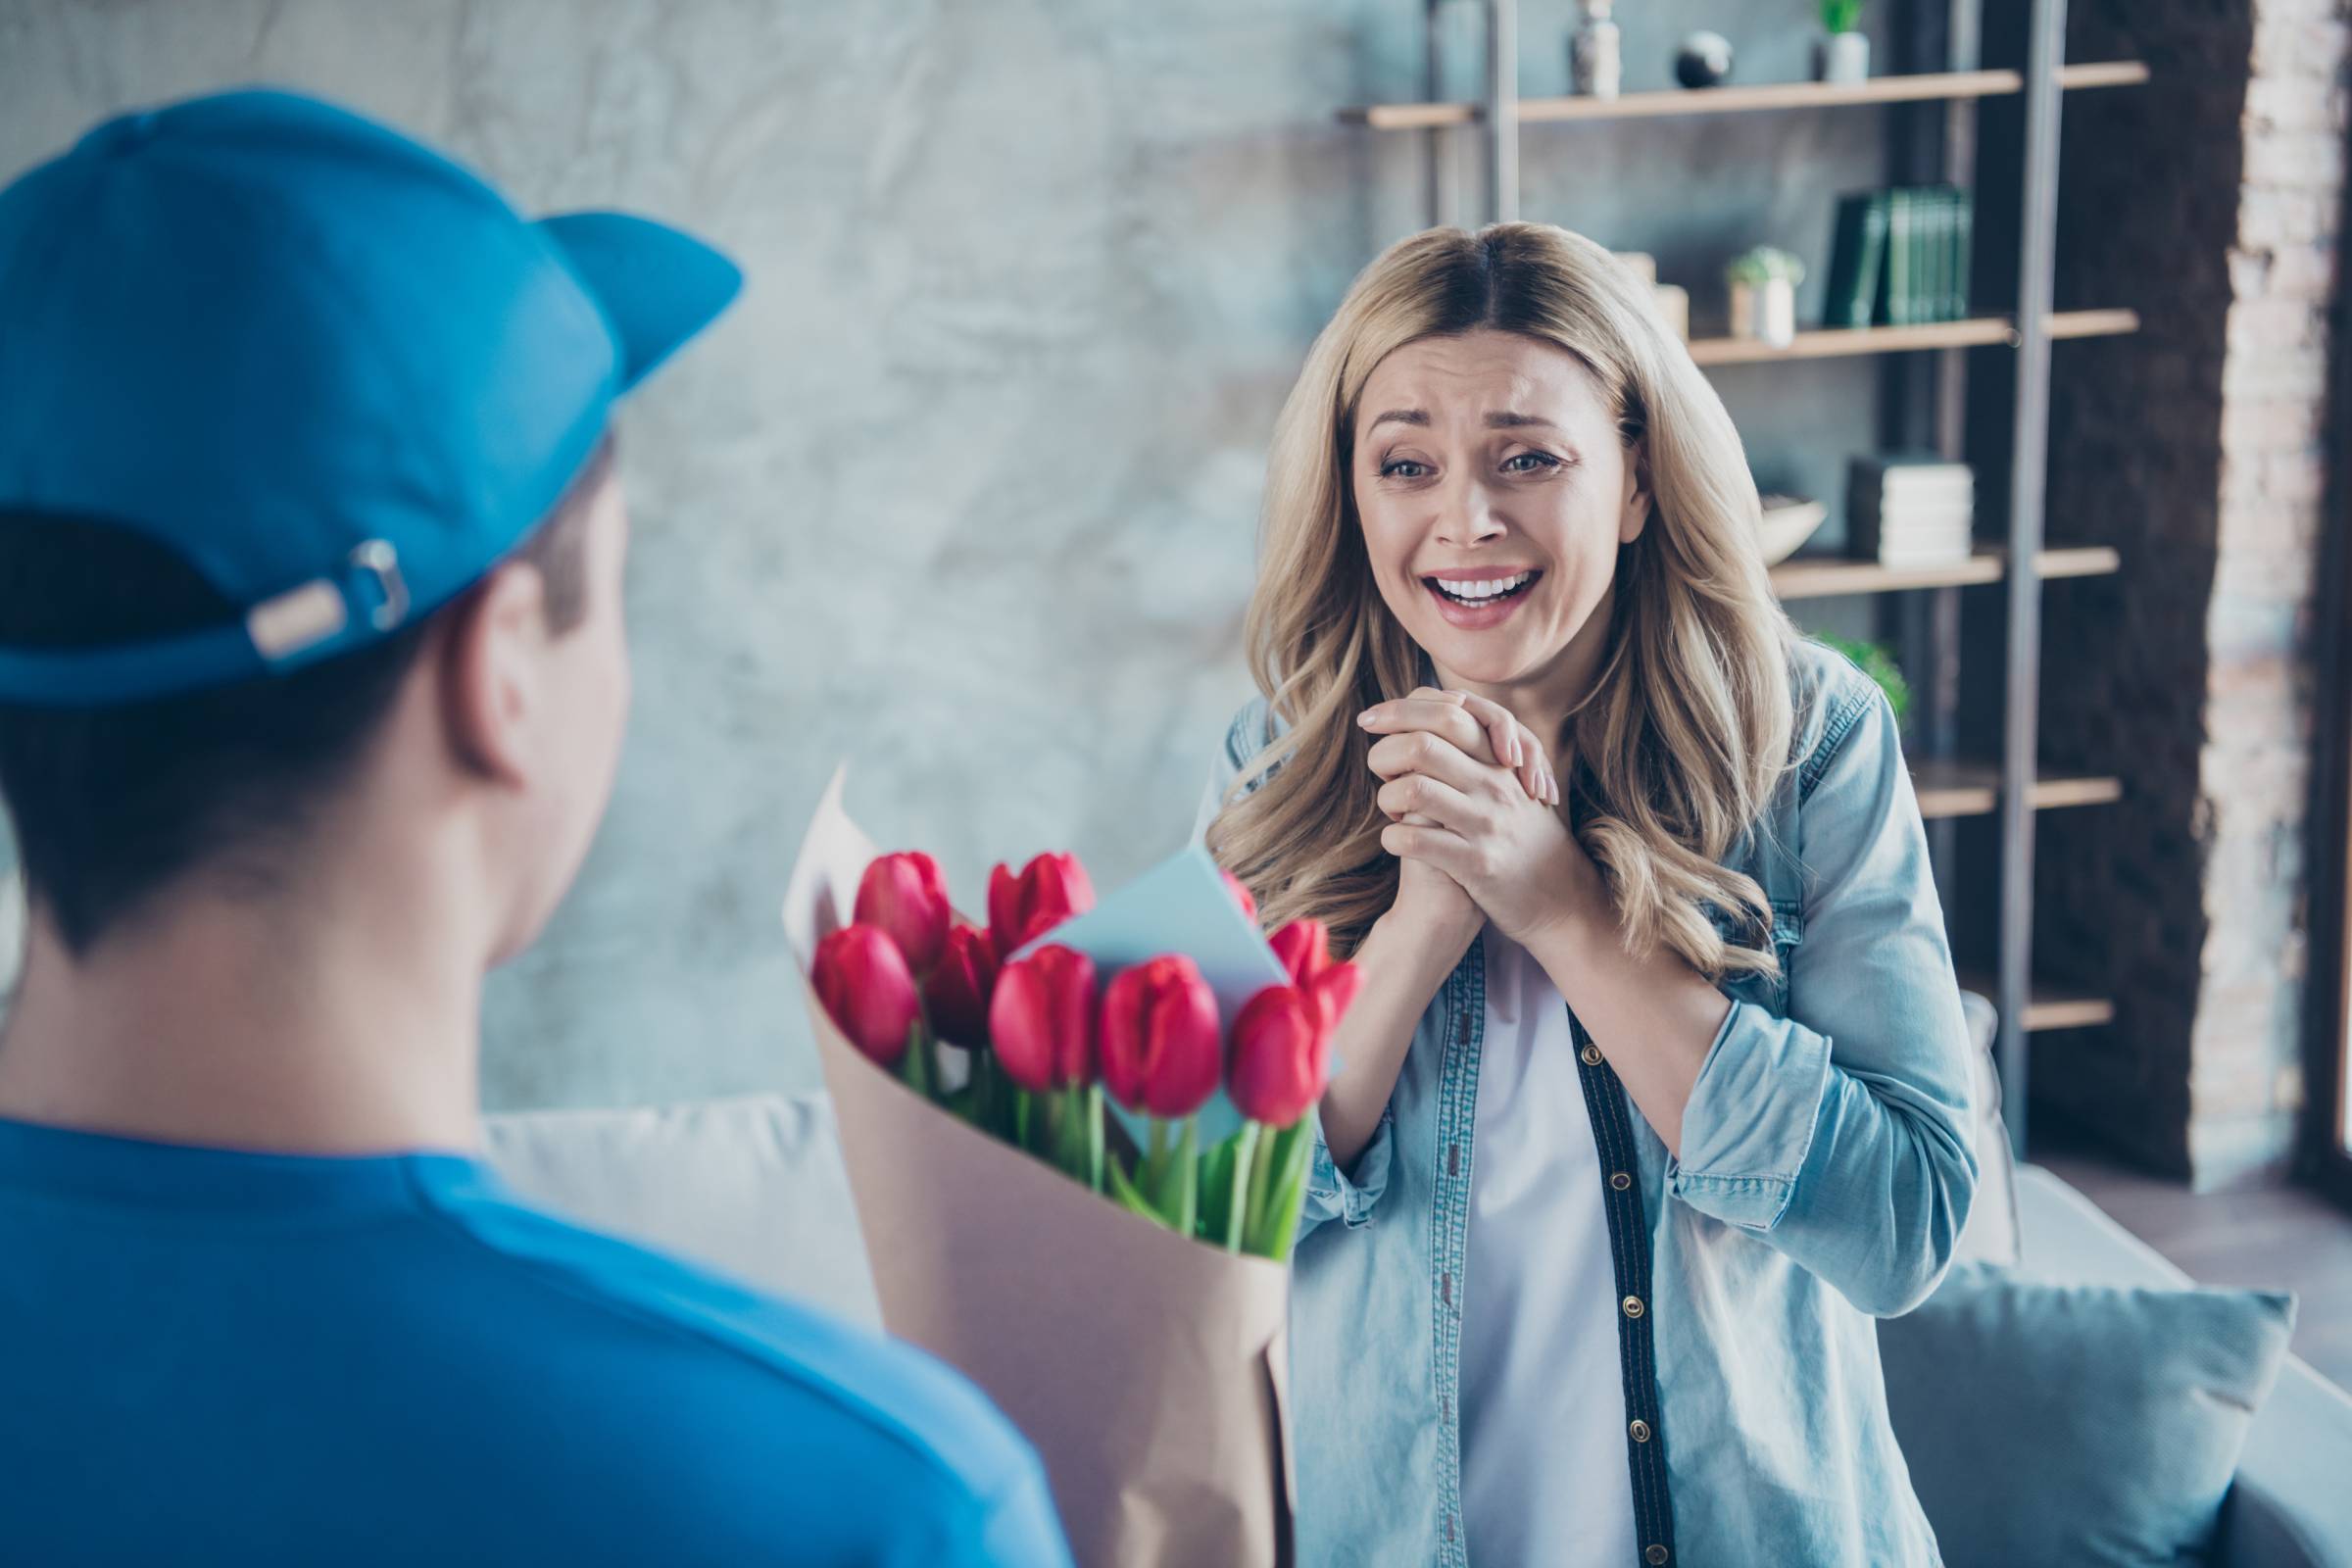 A woman joyfully receiving a bouquet of flowers from a delivery man in a blue shirt.